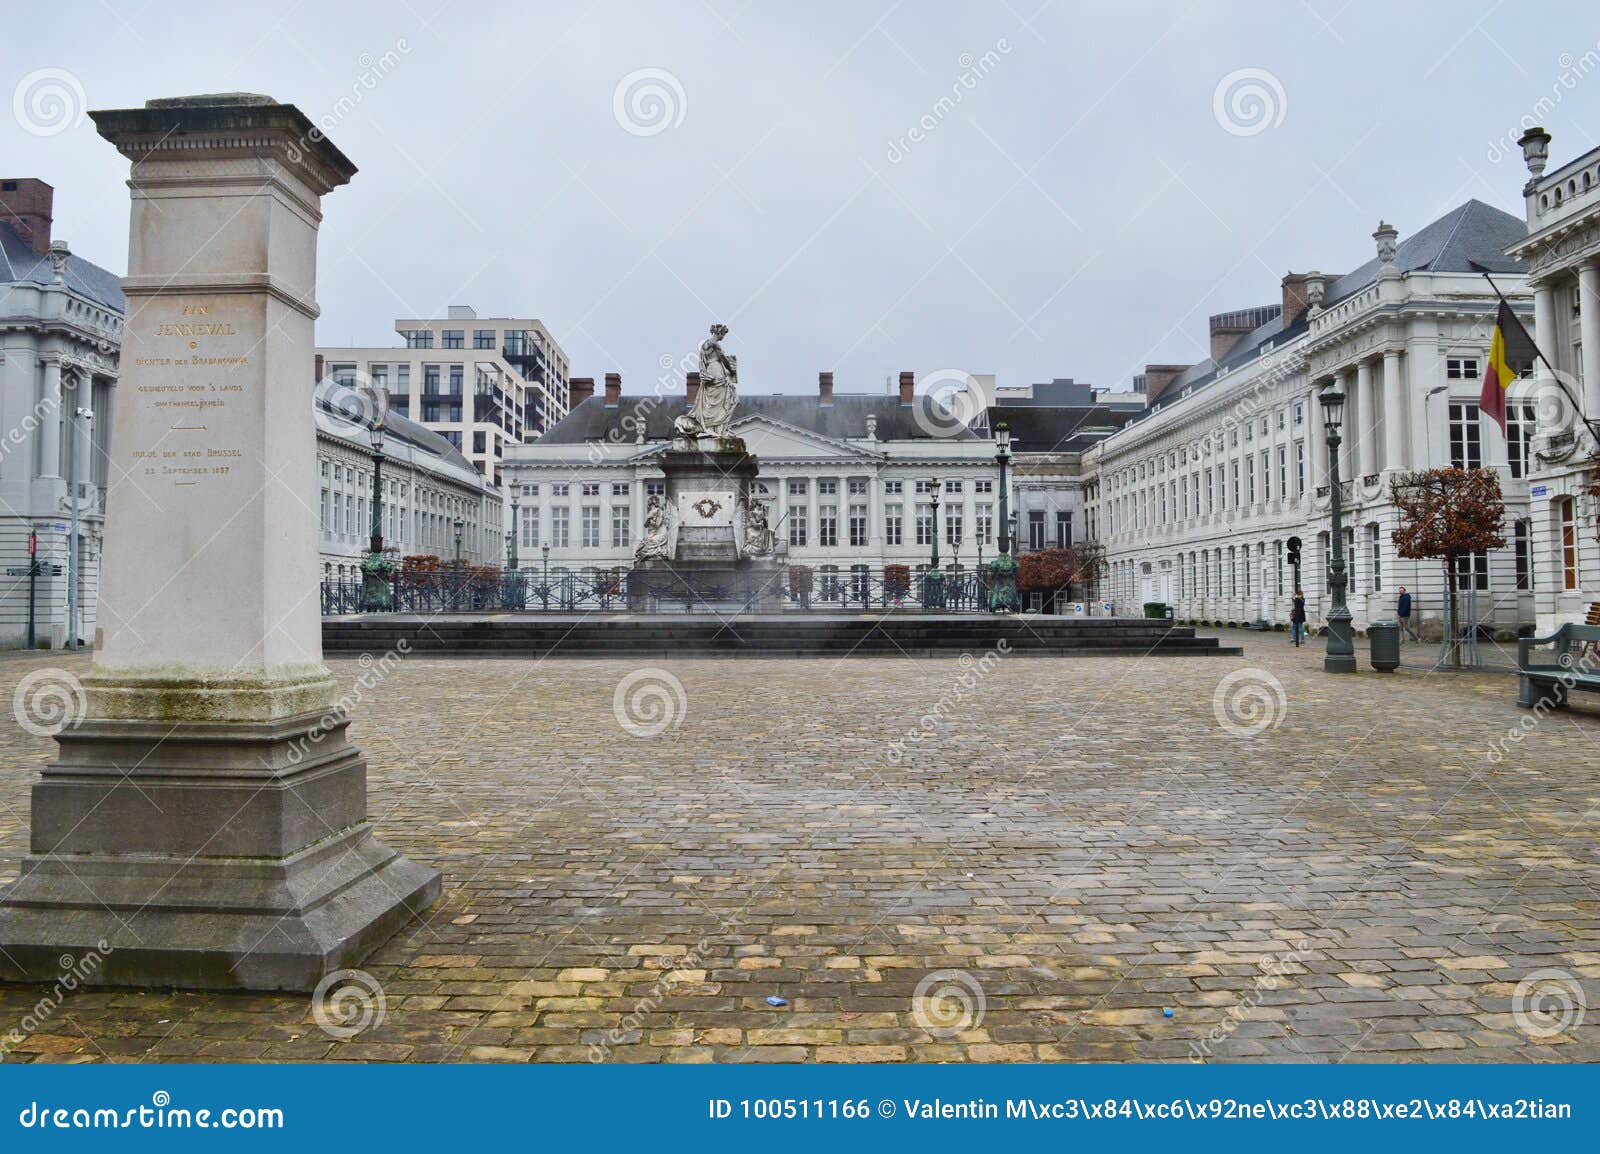 place des martyrs martyrs` square, brussels, belgium